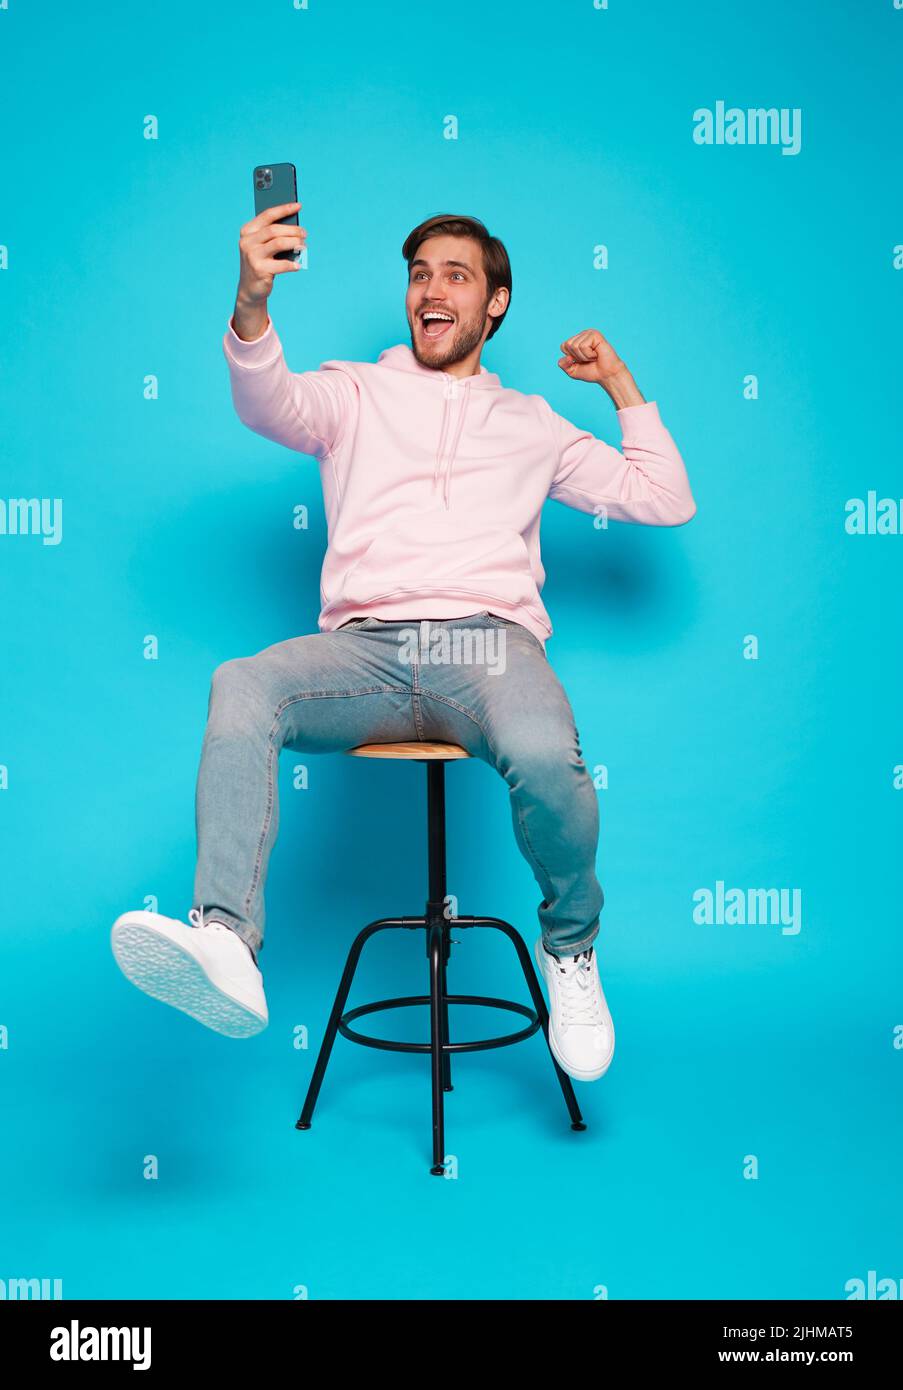 Online Profit. Portrait of a joyful young man sitting on chair and holding mobile phone isolated over light blue background, celebrating financial suc Stock Photo